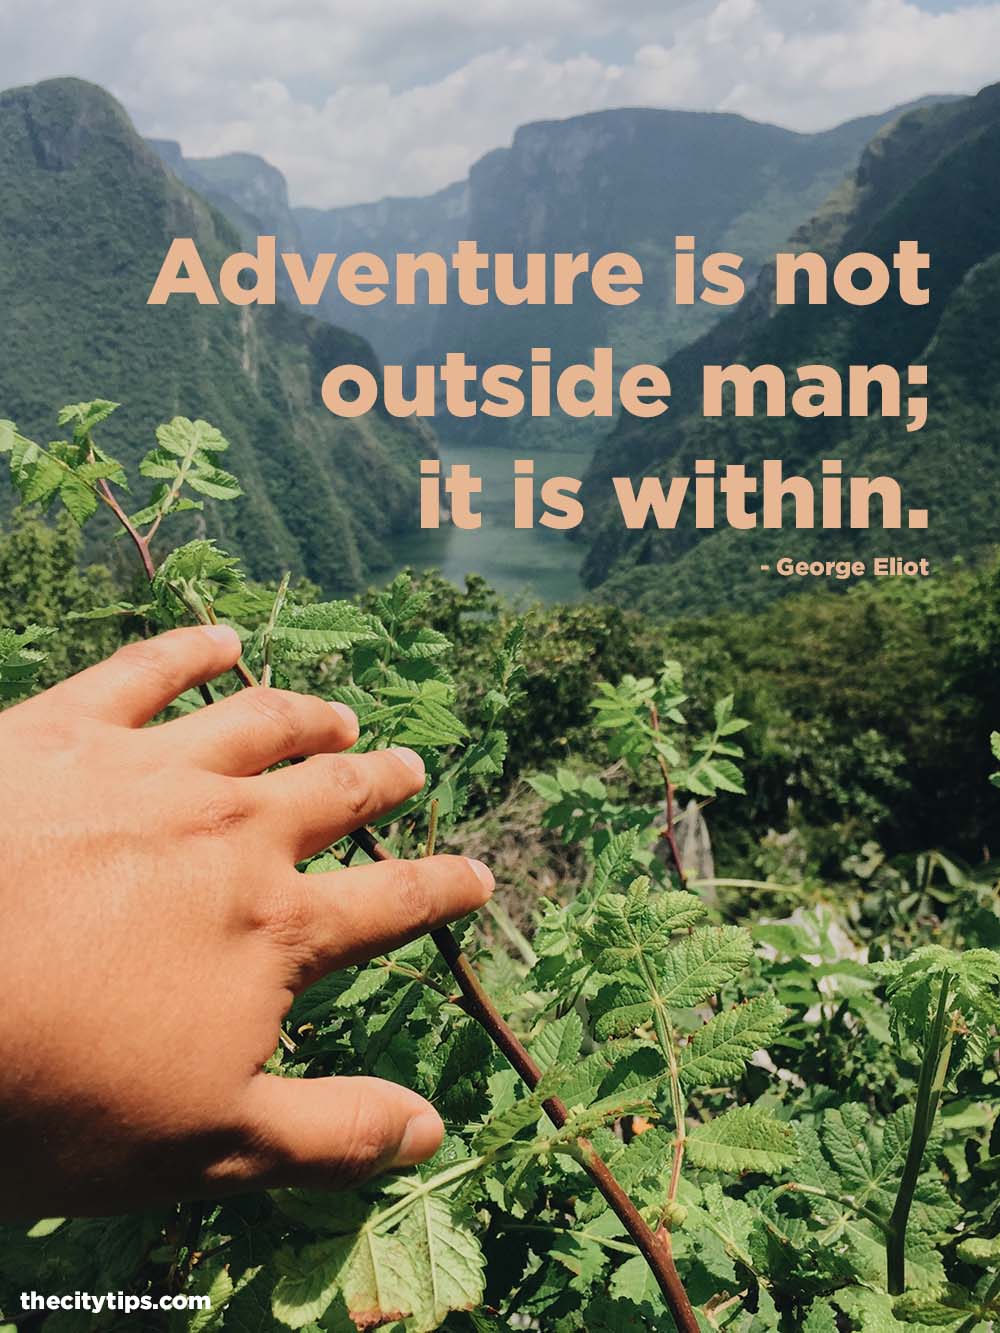 "Adventure is not outside man; it is within." by George Eliot